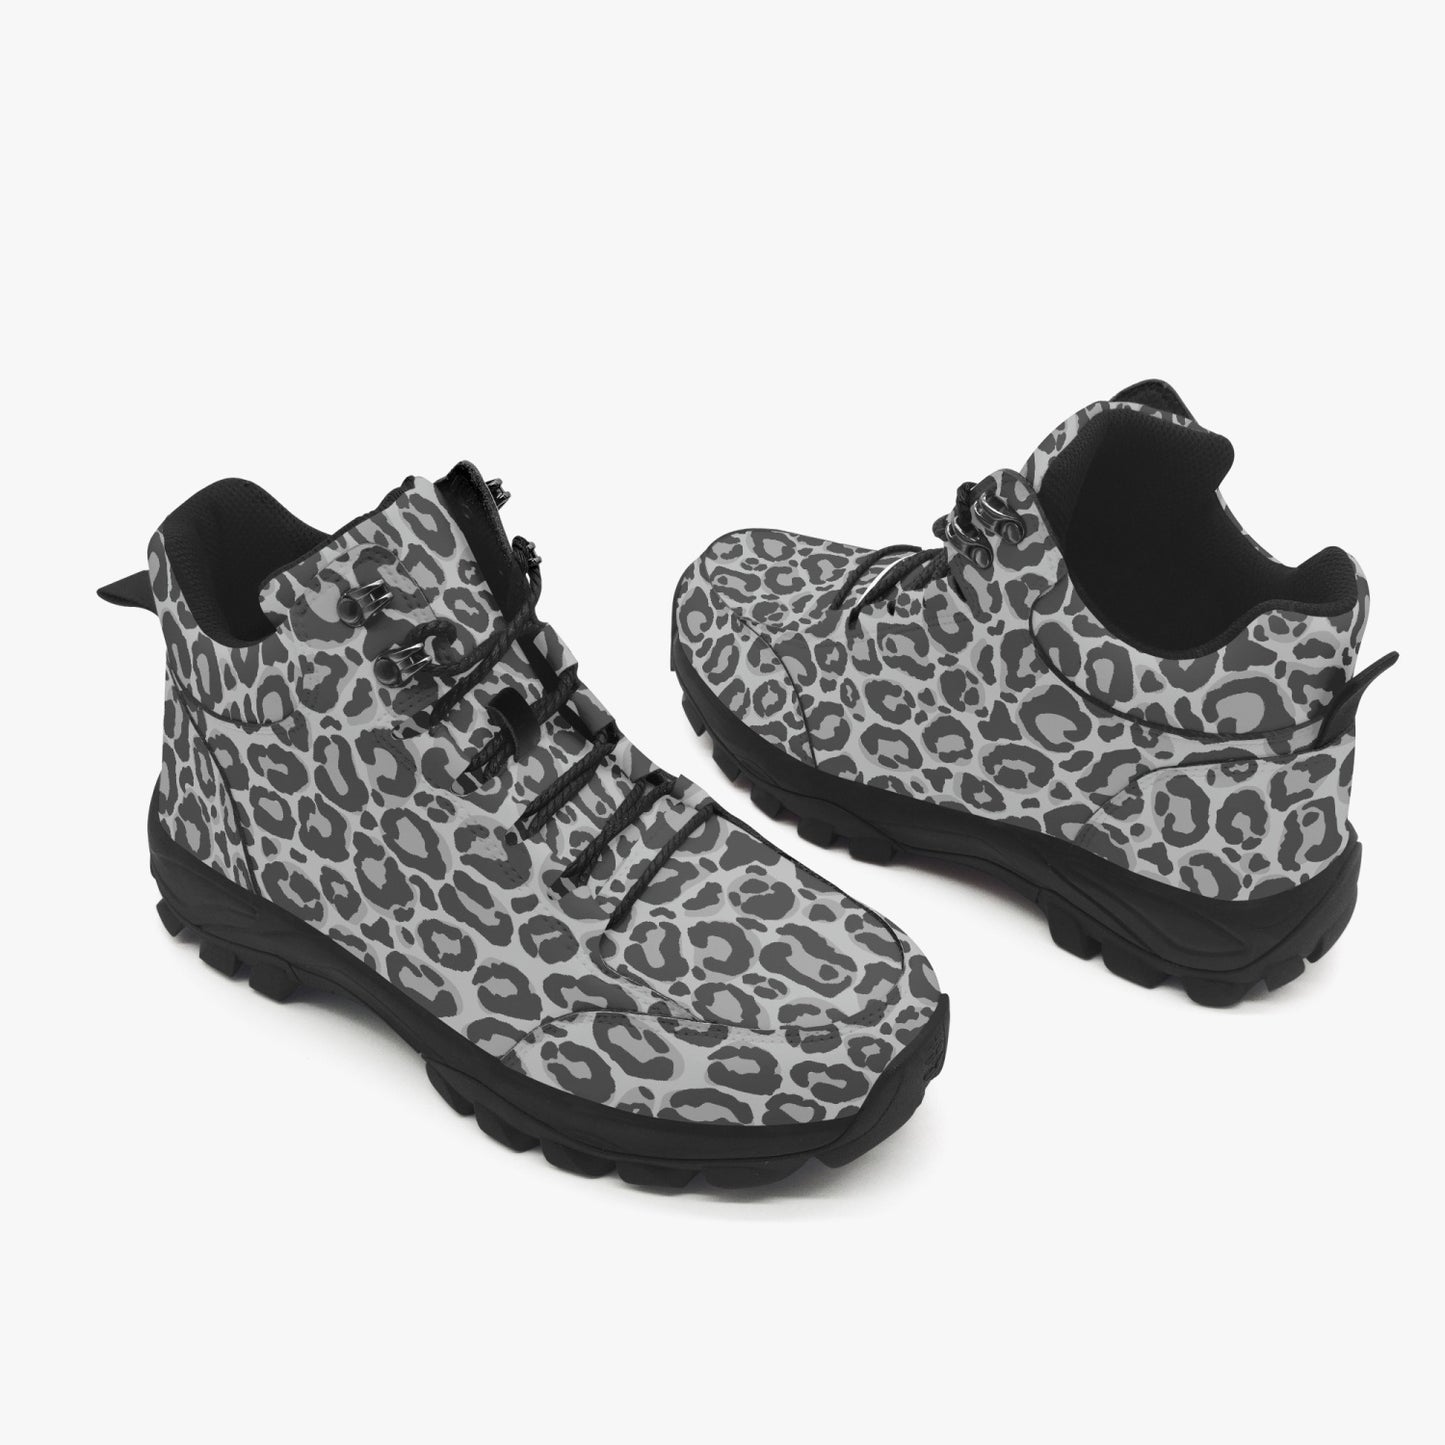 Grey Leopard Hiking Leather Boots, Gray Animal Cheetah Print Men Women Lace Up Walking Hunting Rubber Shoes Print Ankle Winter Casual Work